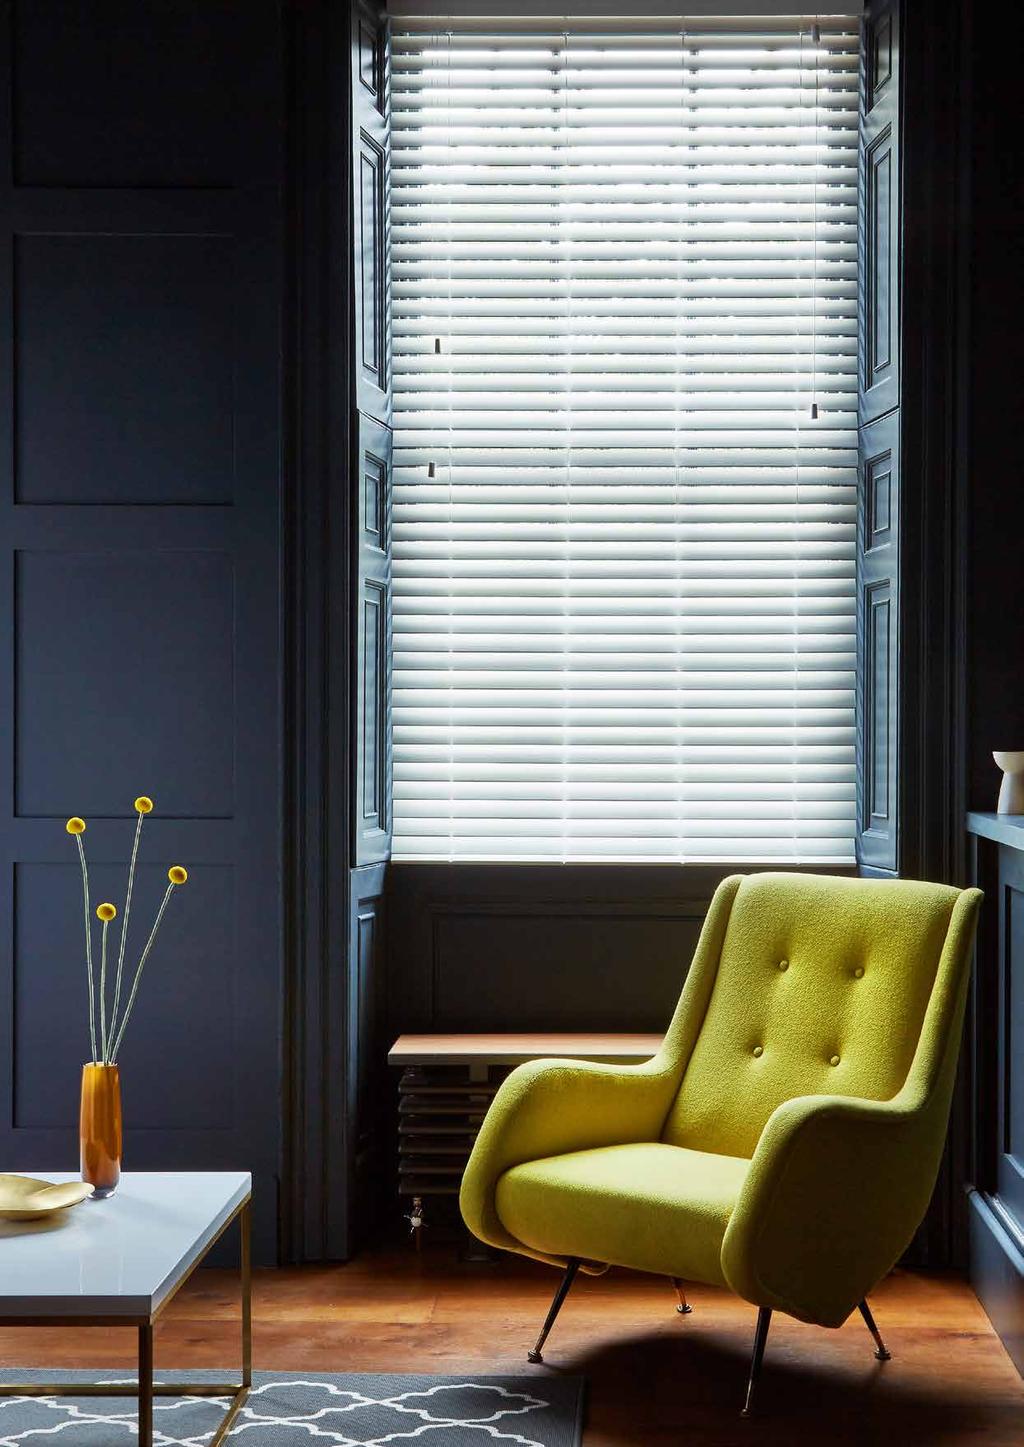 With a large choice of materials to choose from, Venetian blinds are versatile and suit all types of interior styling.